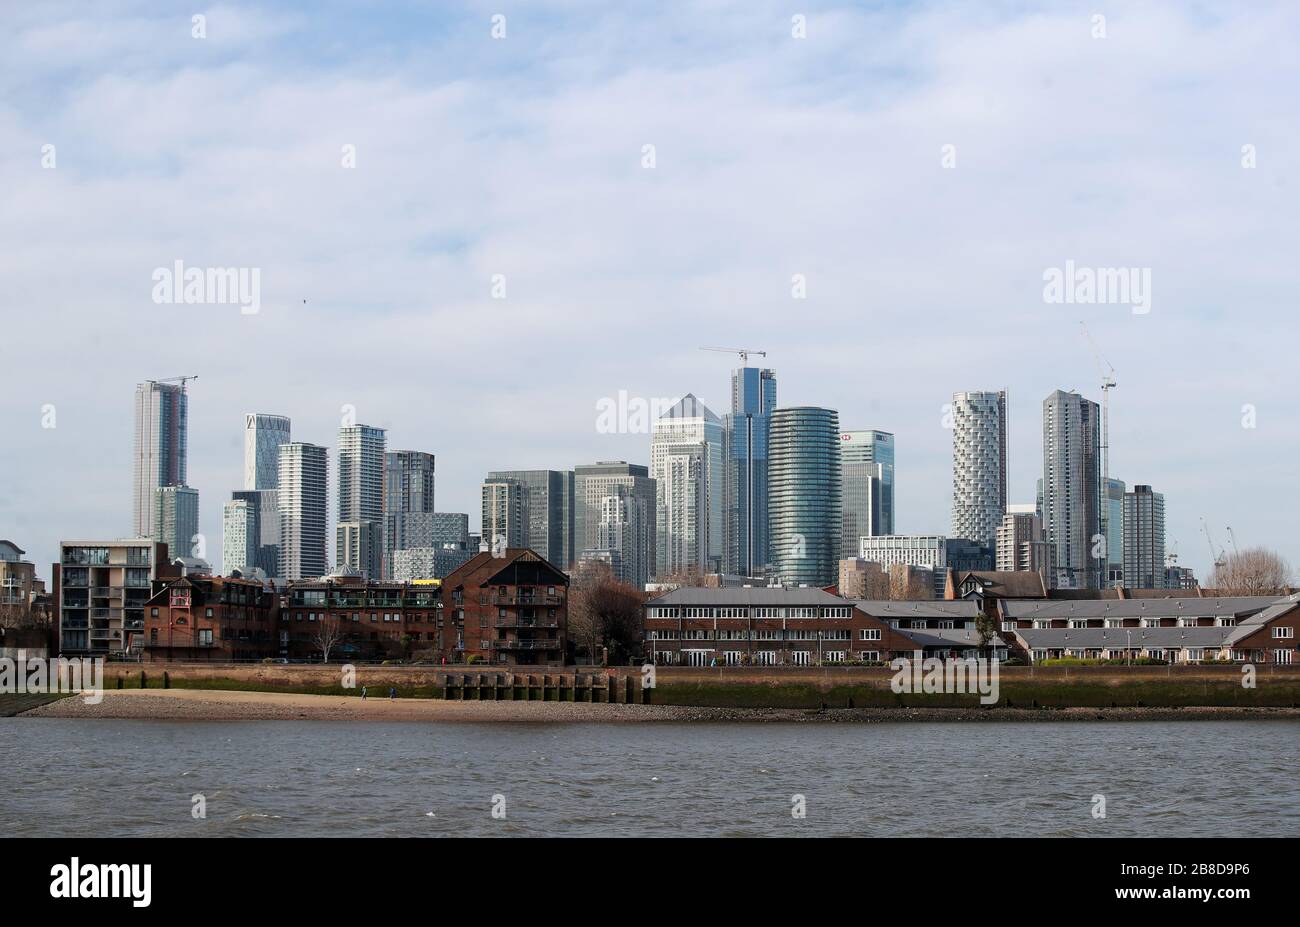 A view across the River Thames of the financial district in Canary Wharf in London after Prime Minister Boris Johnson ordered pubs, cafes, nightclubs, bars, restaurants, theatres, leisure centres and gyms to close to fight coronavirus. Stock Photo